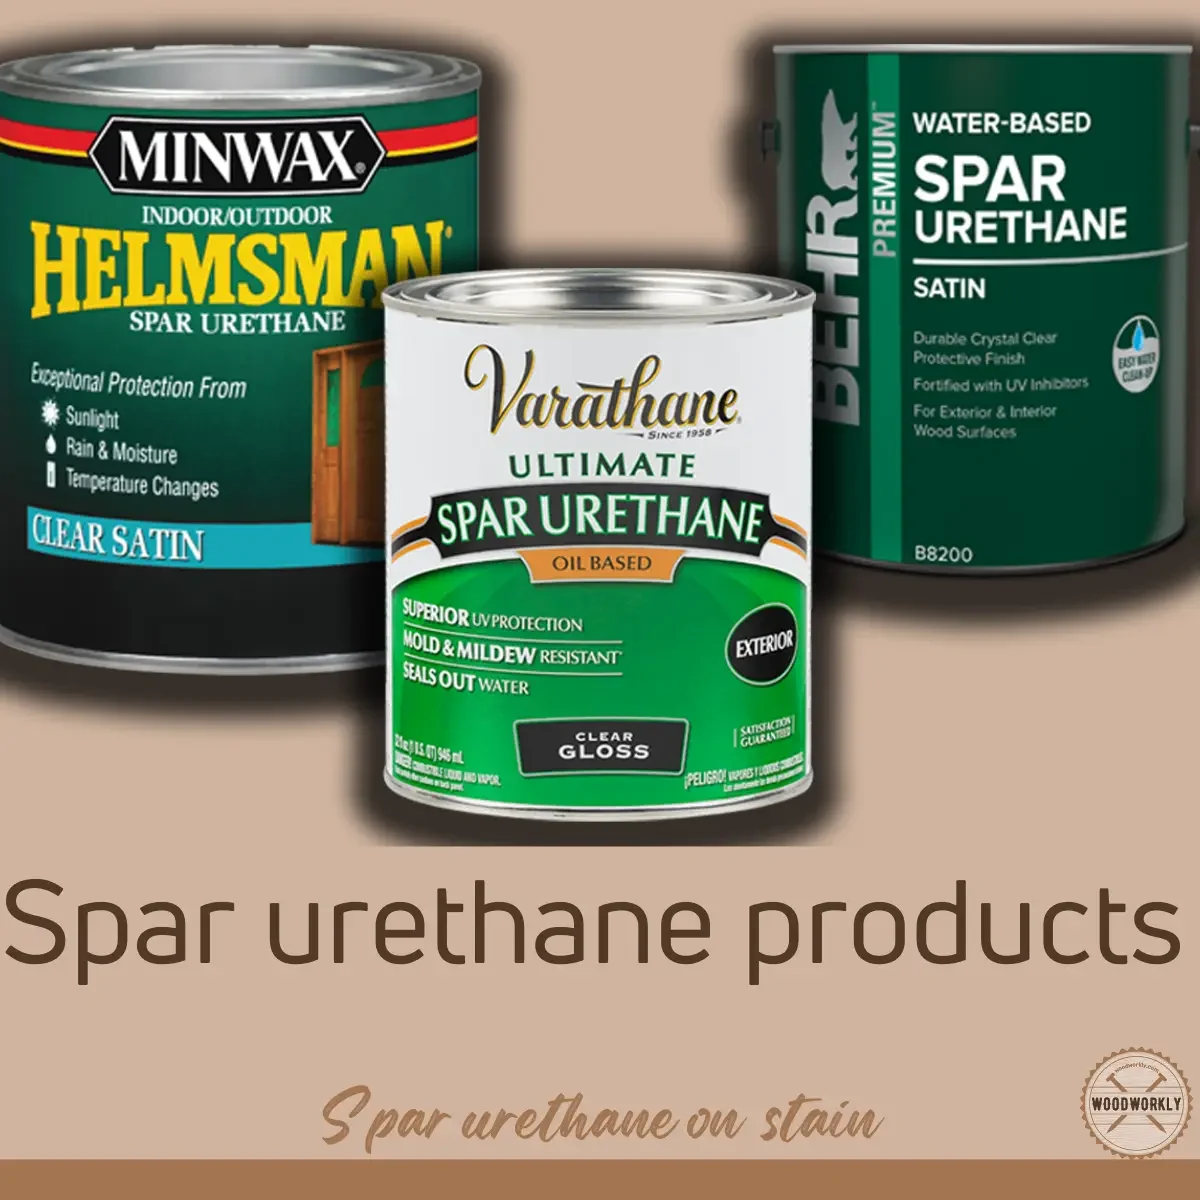 Spar urethane products can use over stain